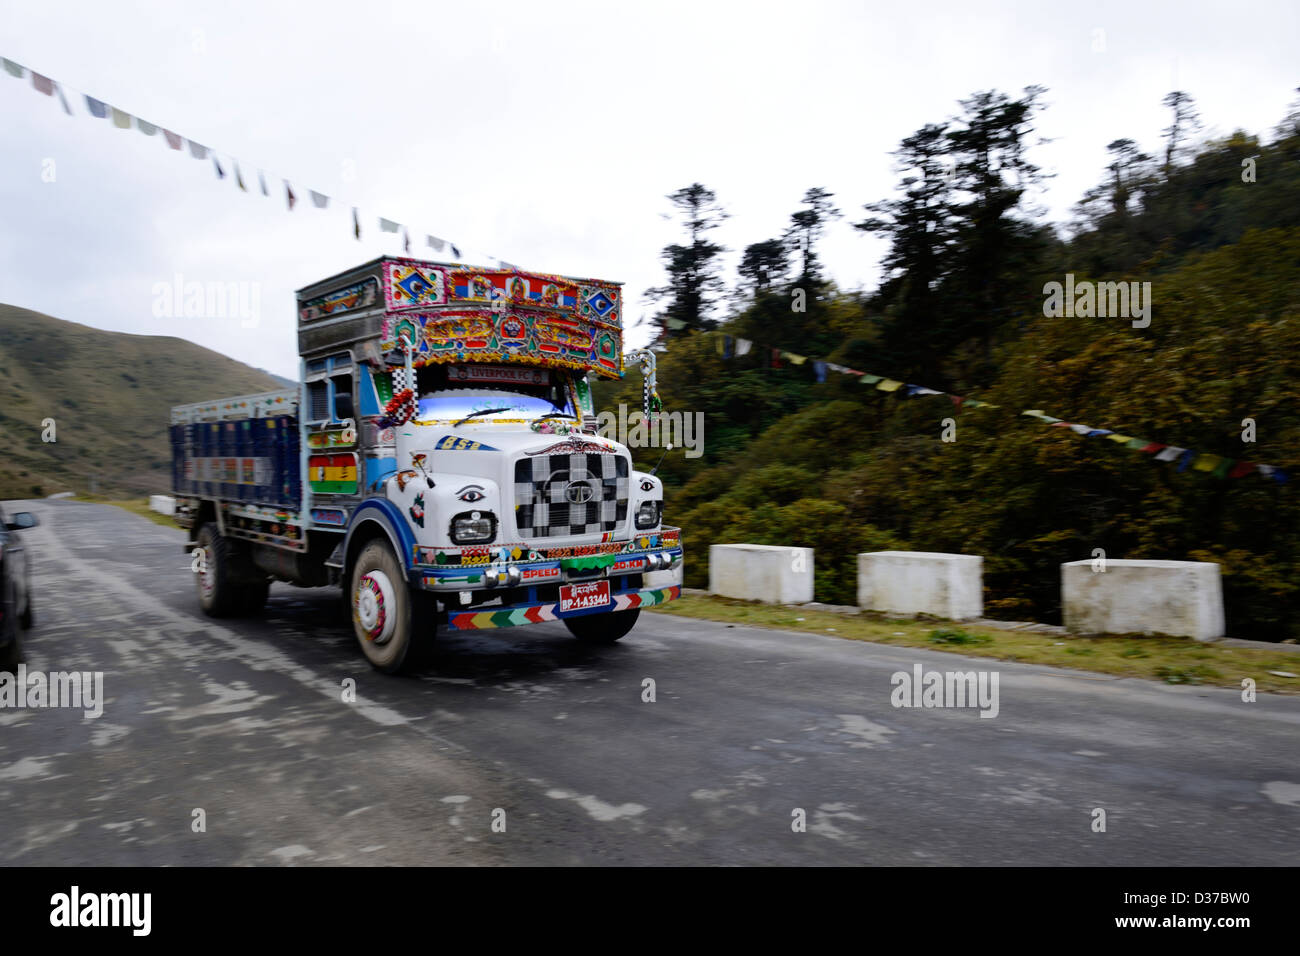 Decorative truck traveling mountain roads of Bhutan, decorated with Buddhist symbols,also Liverpool FC scarf,Pele La,pass,36MPX Stock Photo